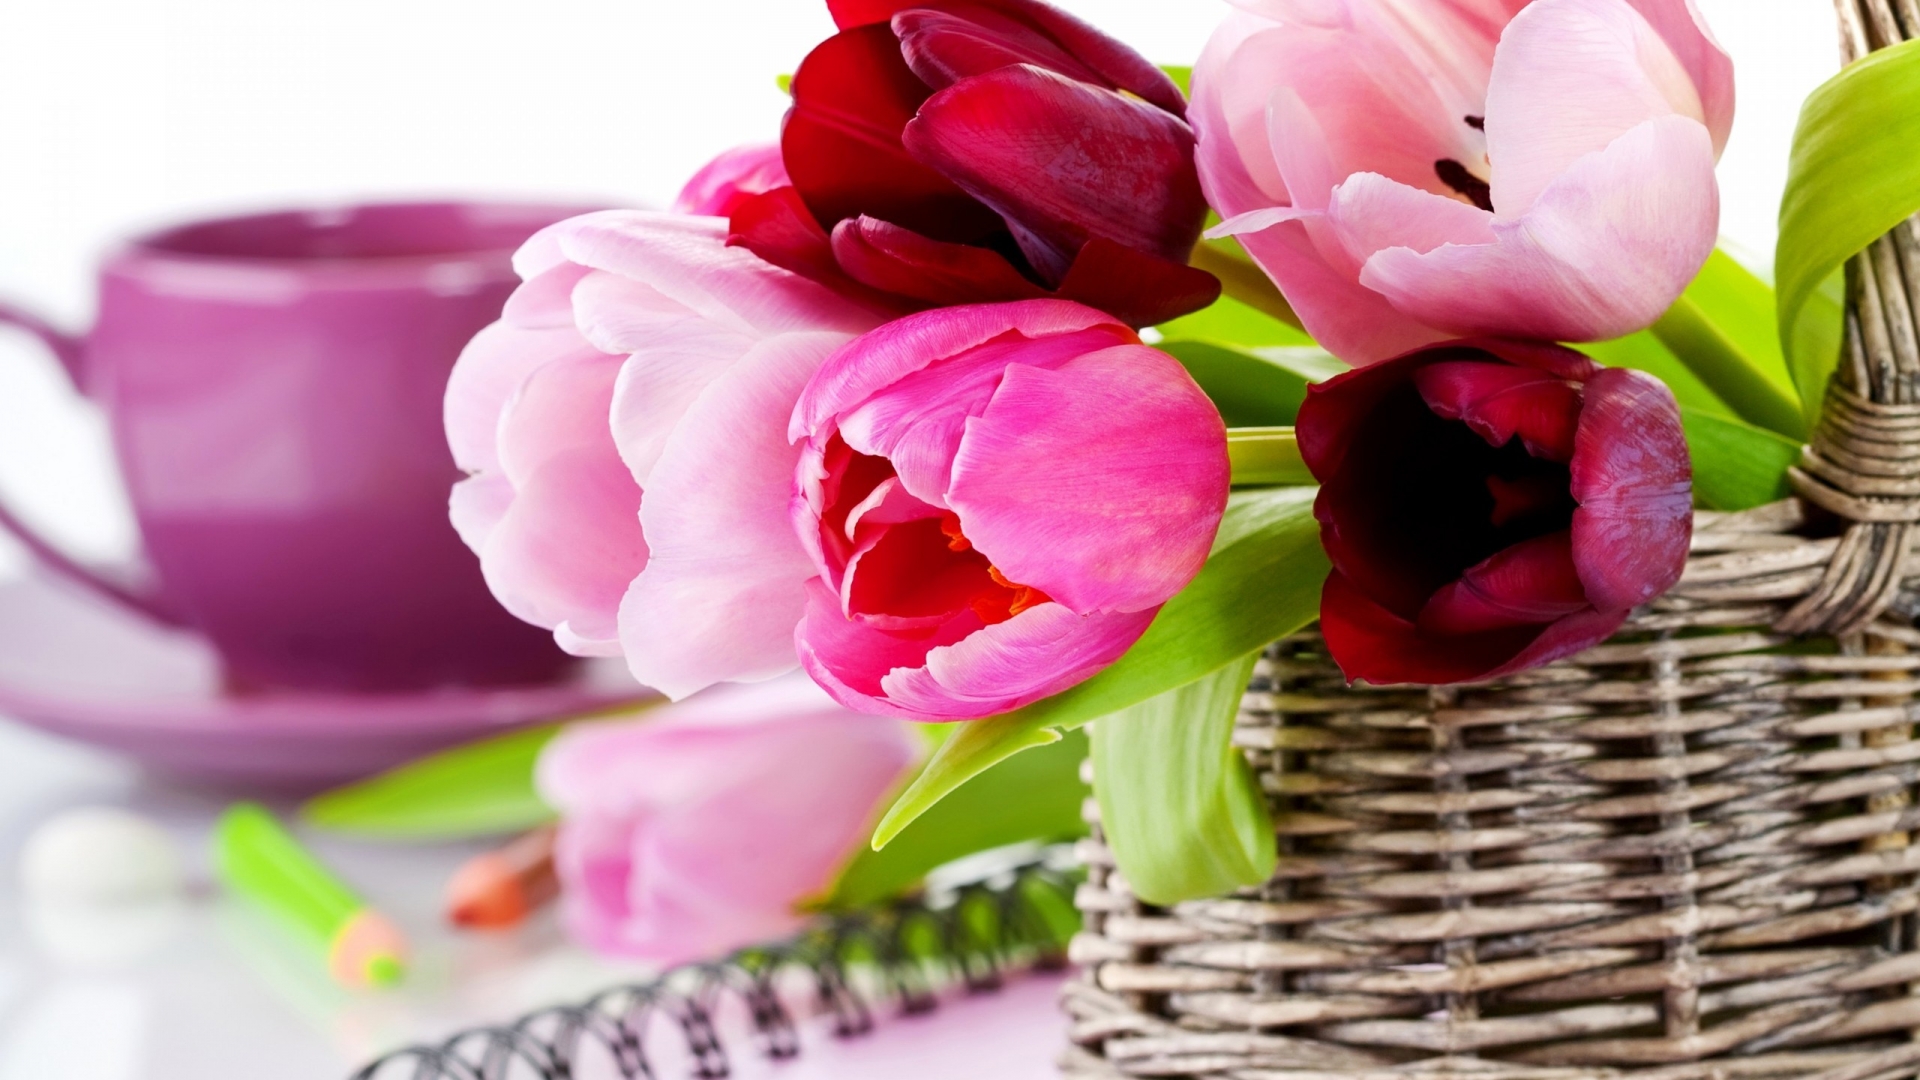 Gorgeous Tulips Basket for 1920 x 1080 HDTV 1080p resolution